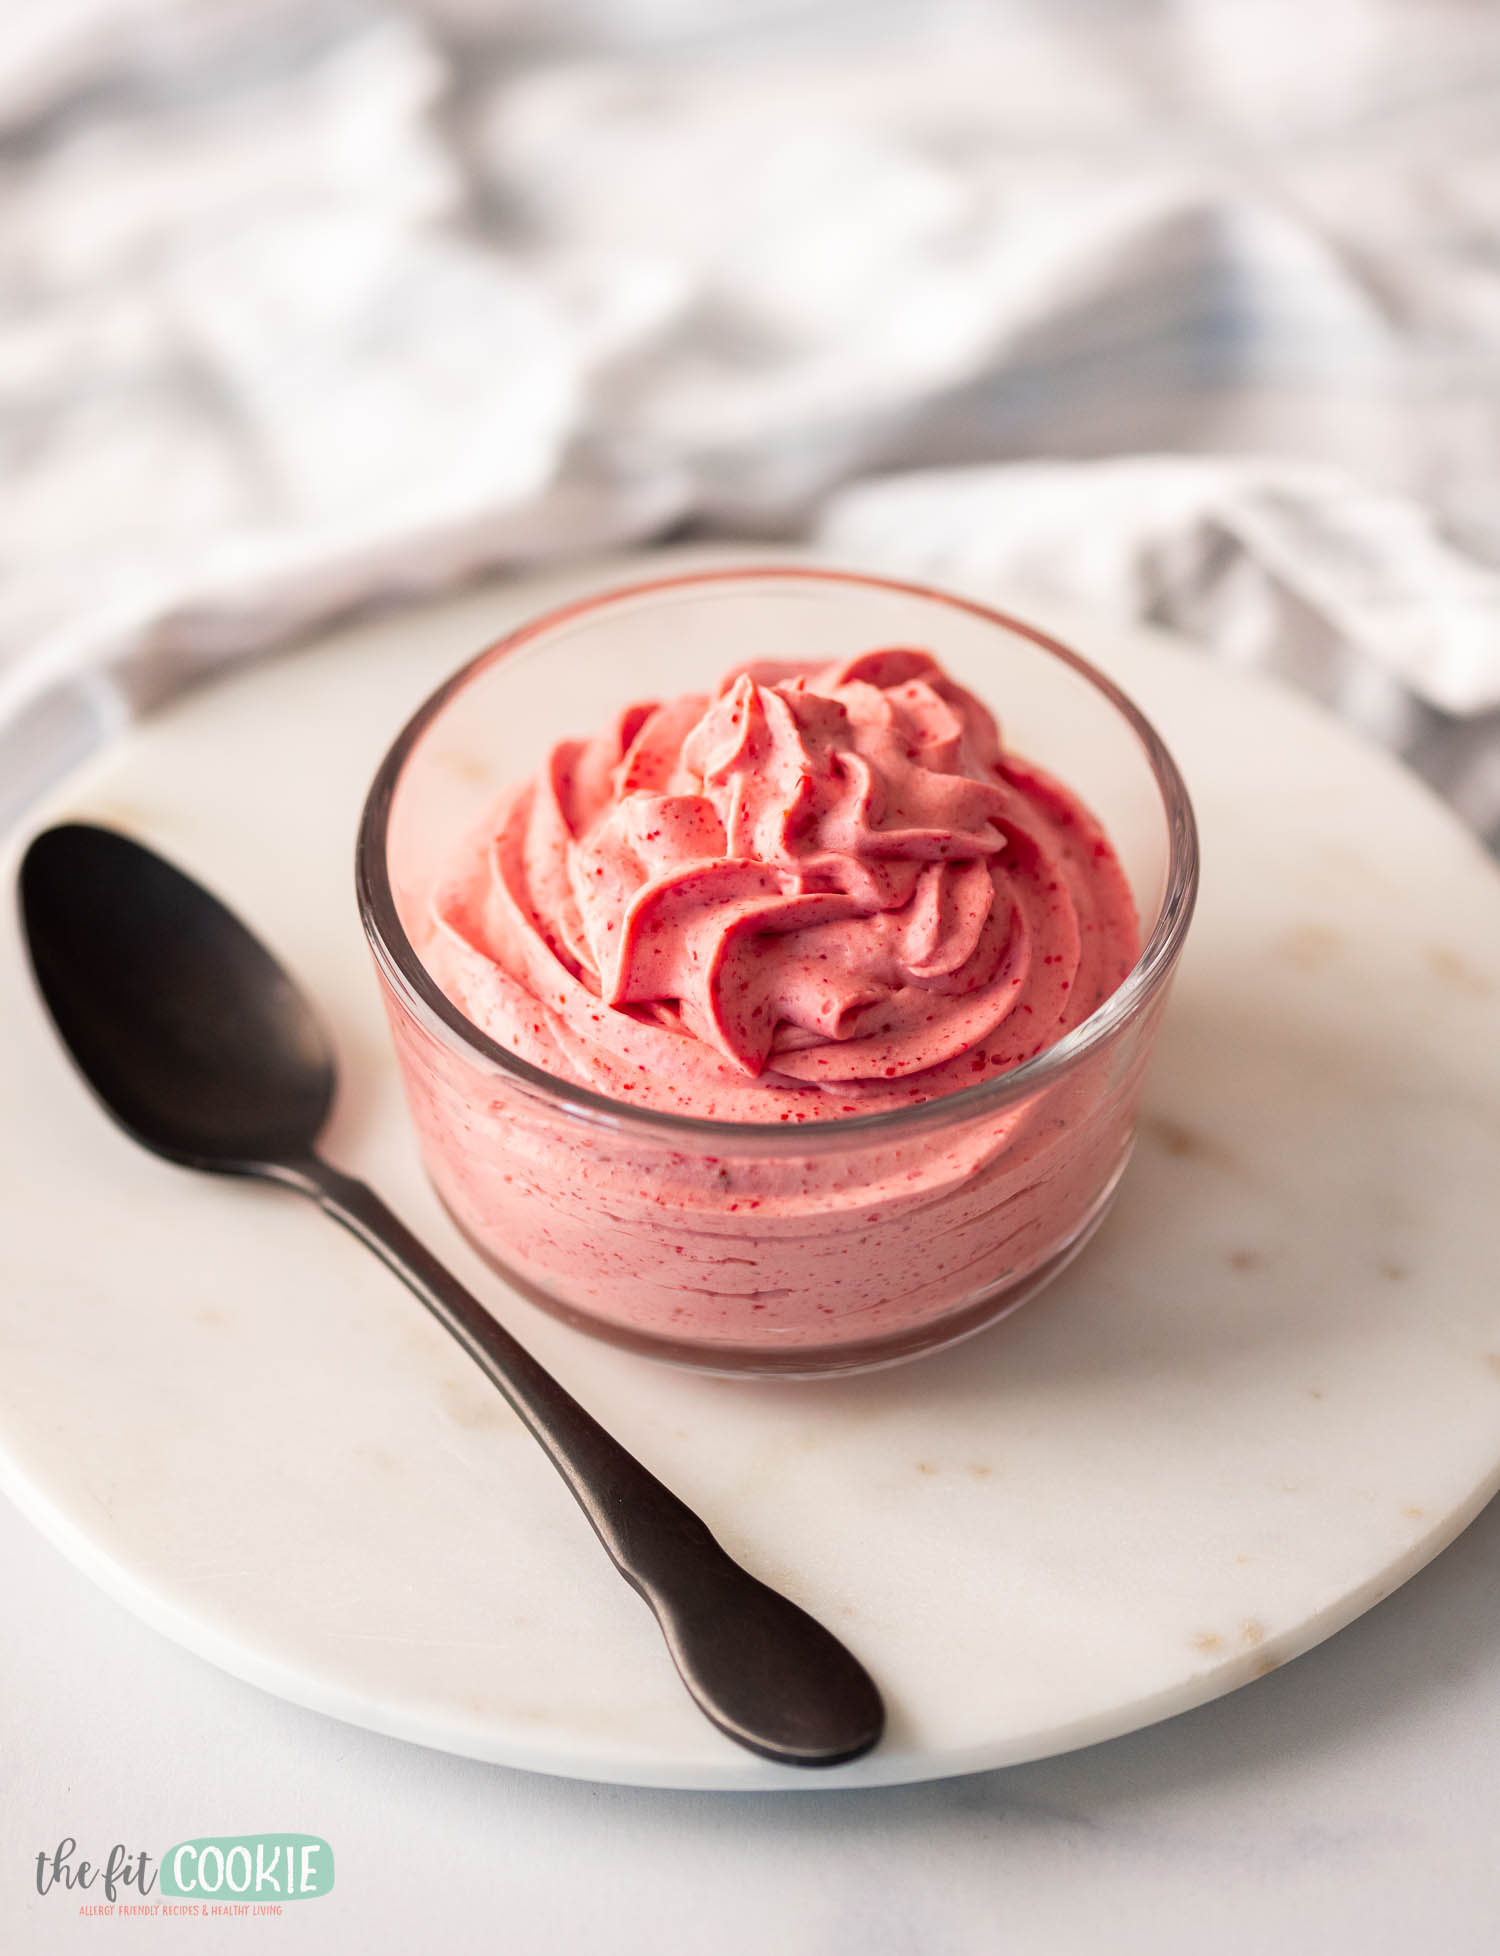 A bowl of pink strawberry mousse on a marble coaster with a spoon on the side.